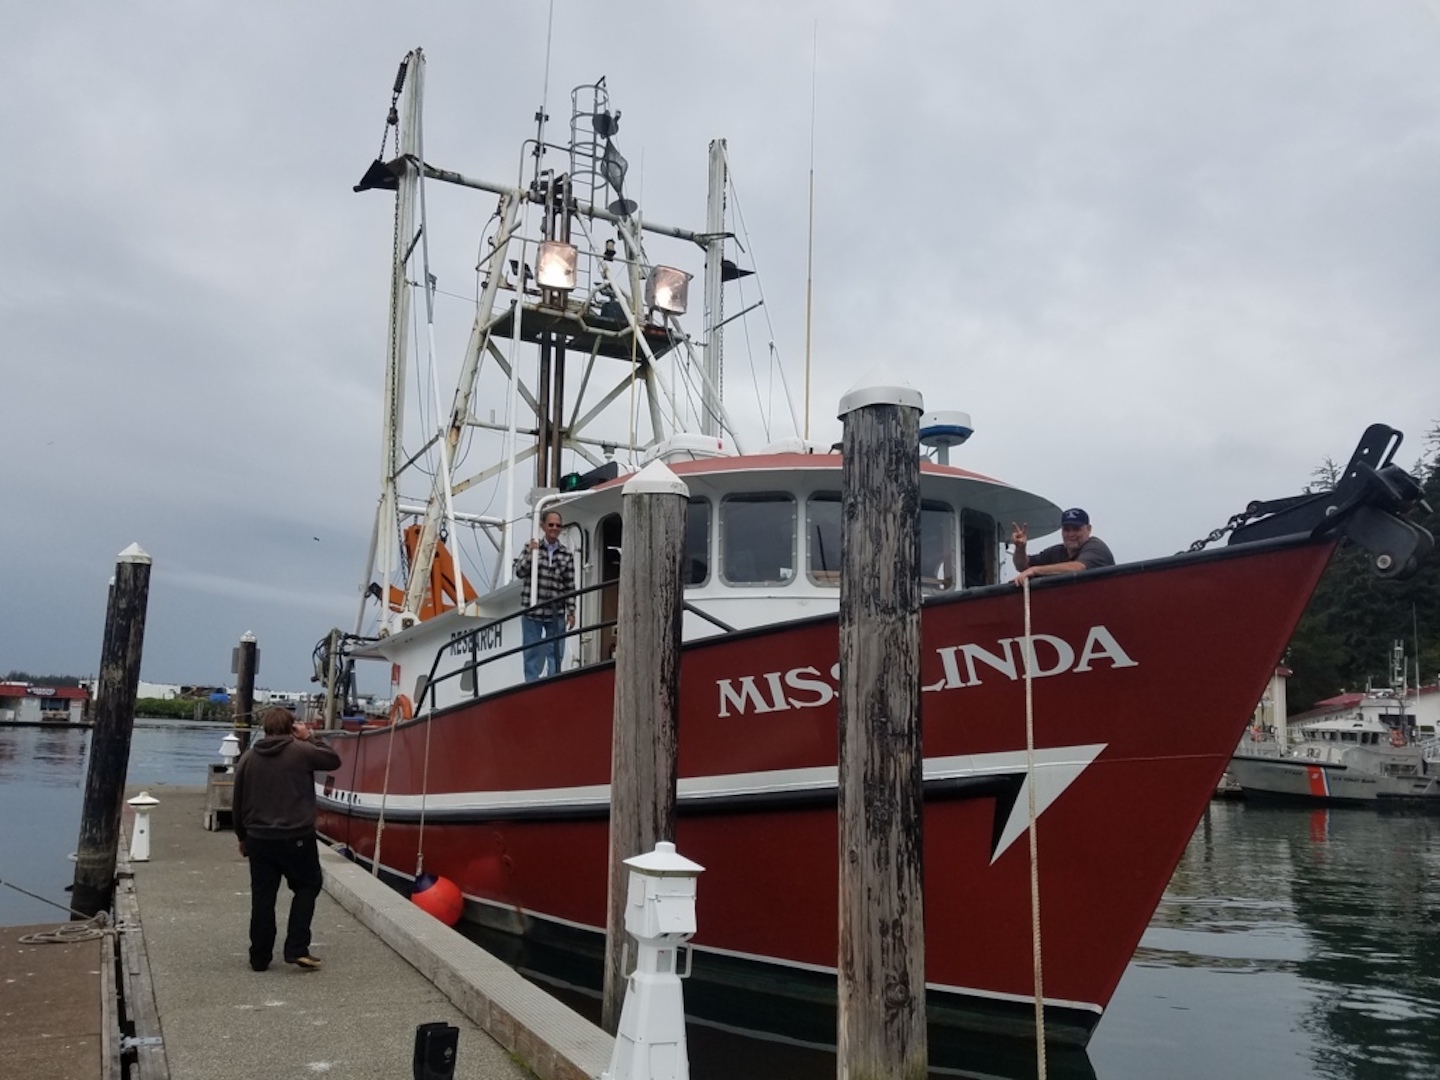 Picture of Miss Linda Boat at Dock